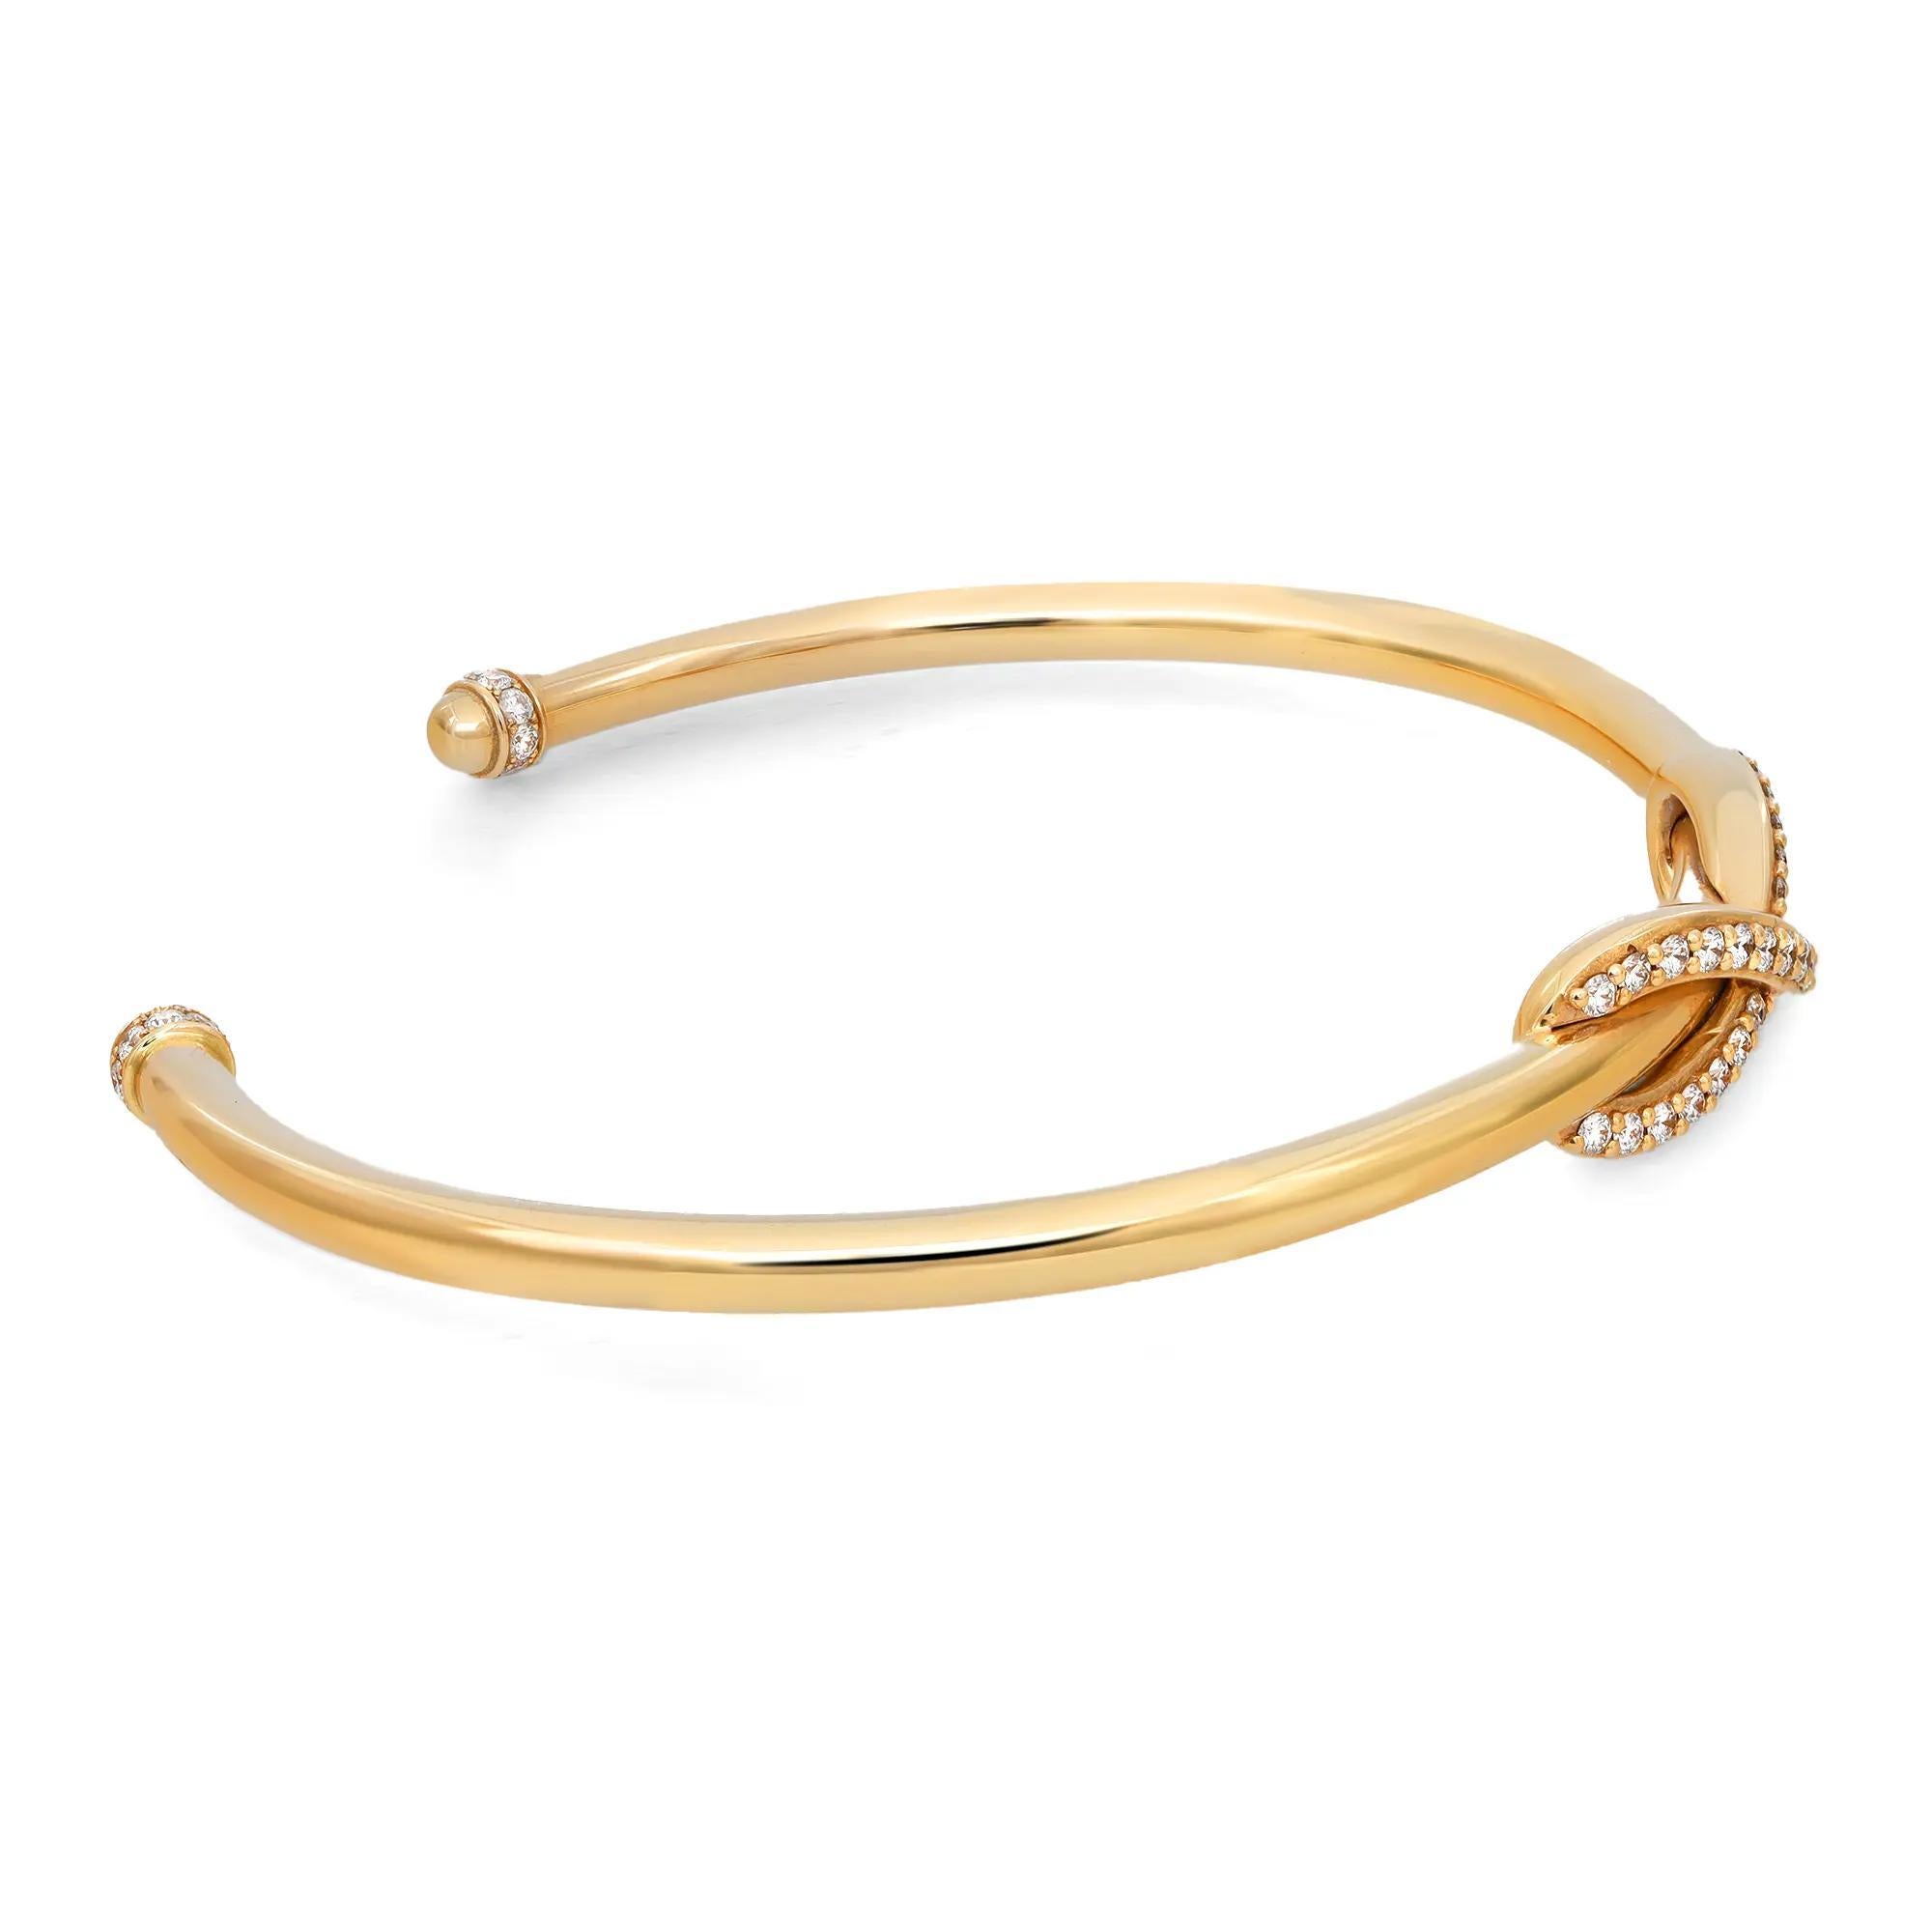 Gorgeous and elegant, Tiffiany & Co. Infinity Diamond Cuff Bracelet exudes sophistication. Stunningly crafted in lustrous 18K yellow gold. It features a cuff style bangle bracelet with a center infinity design studded with round brilliant cut